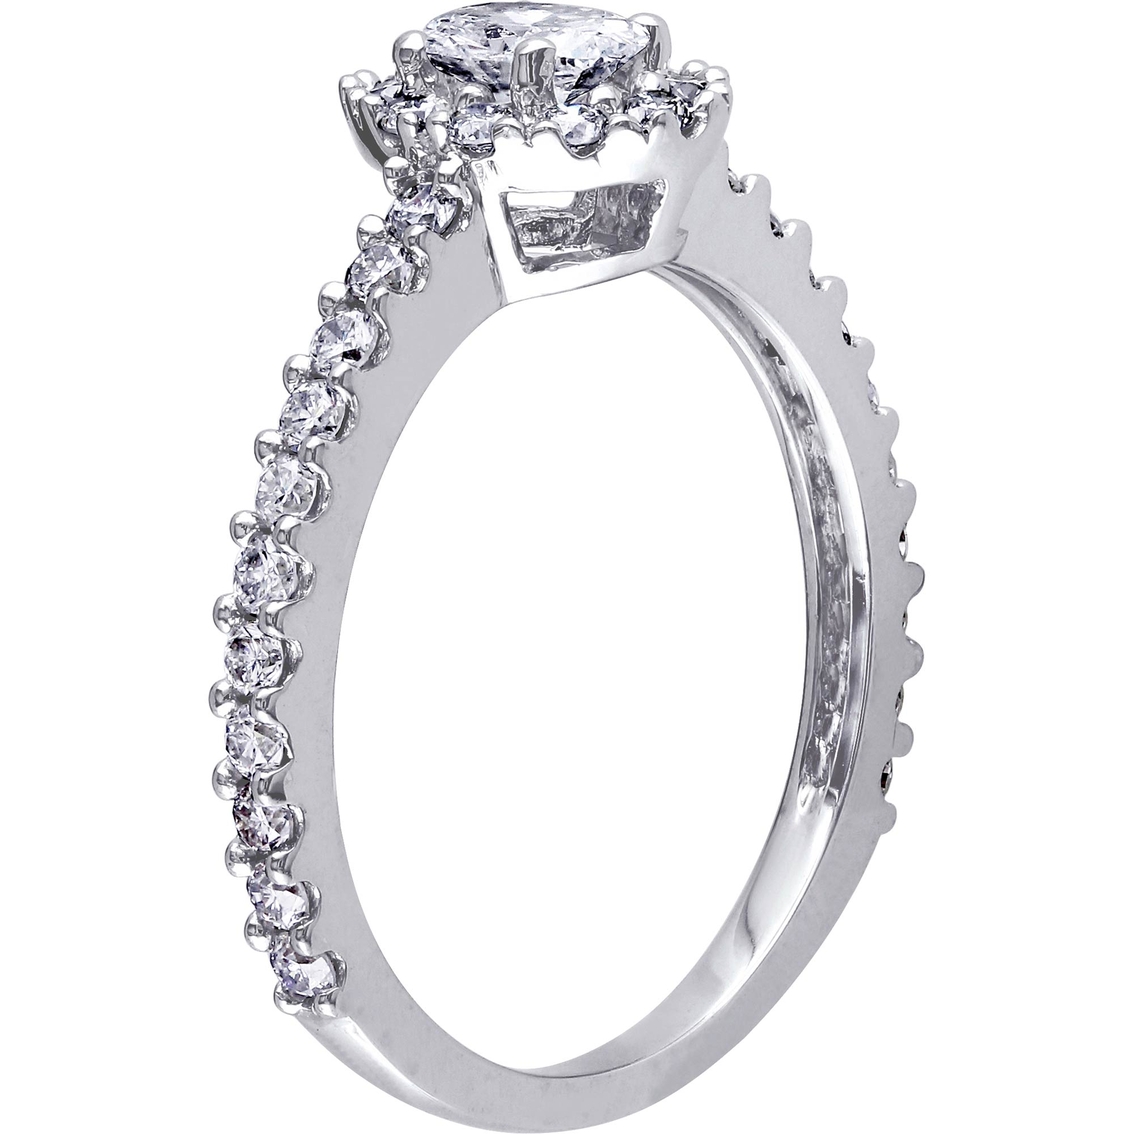 Diamore 14K White Gold 1 CTW Oval Cut Diamond Halo Engagement Ring - Image 2 of 3